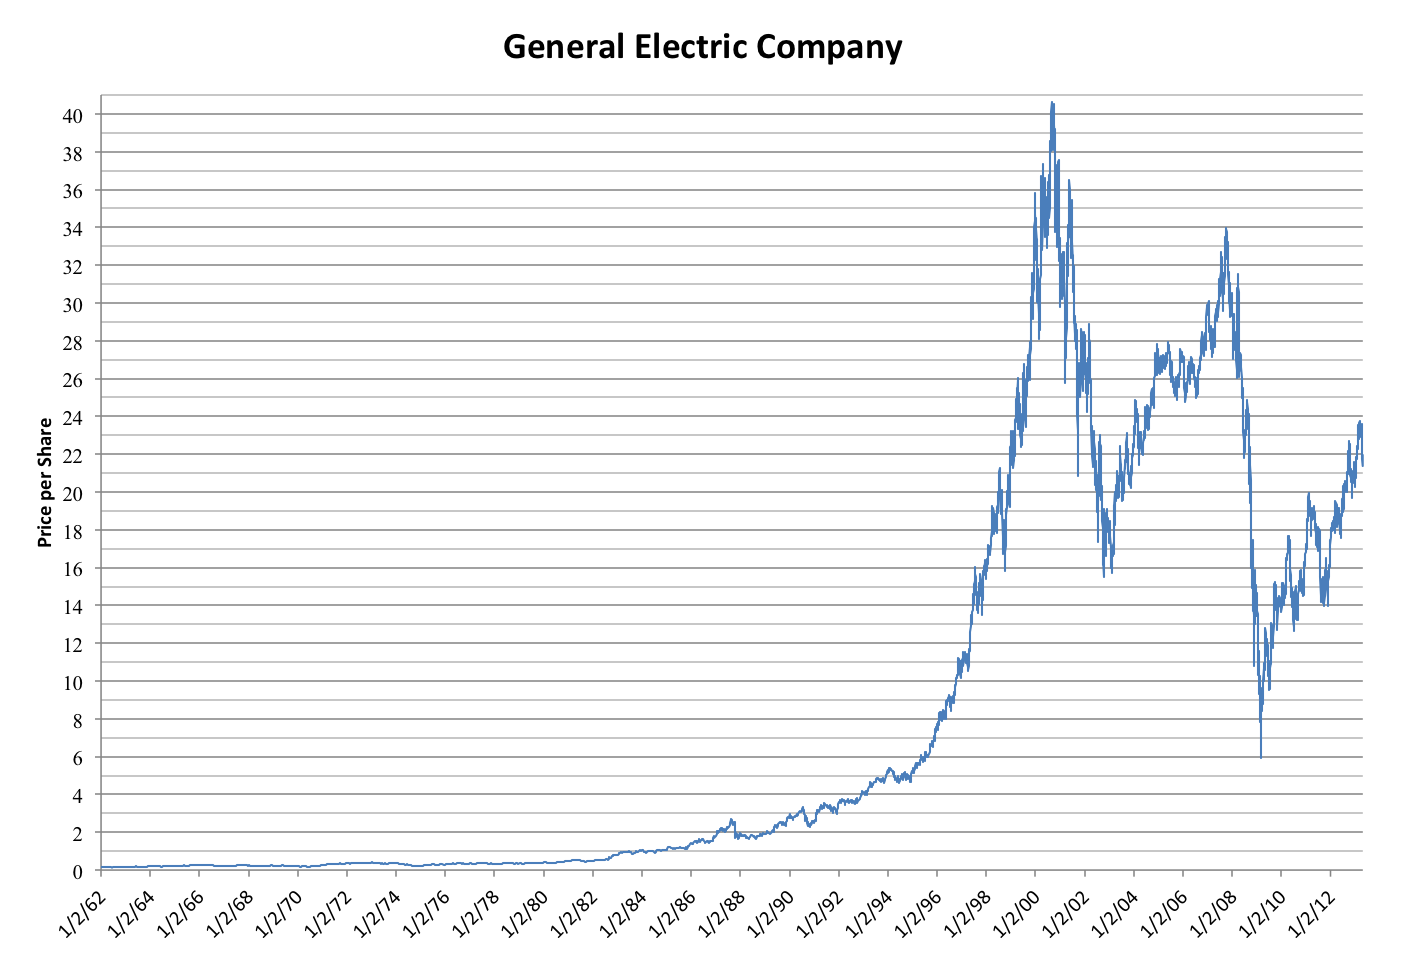 Linear GE stock price graph